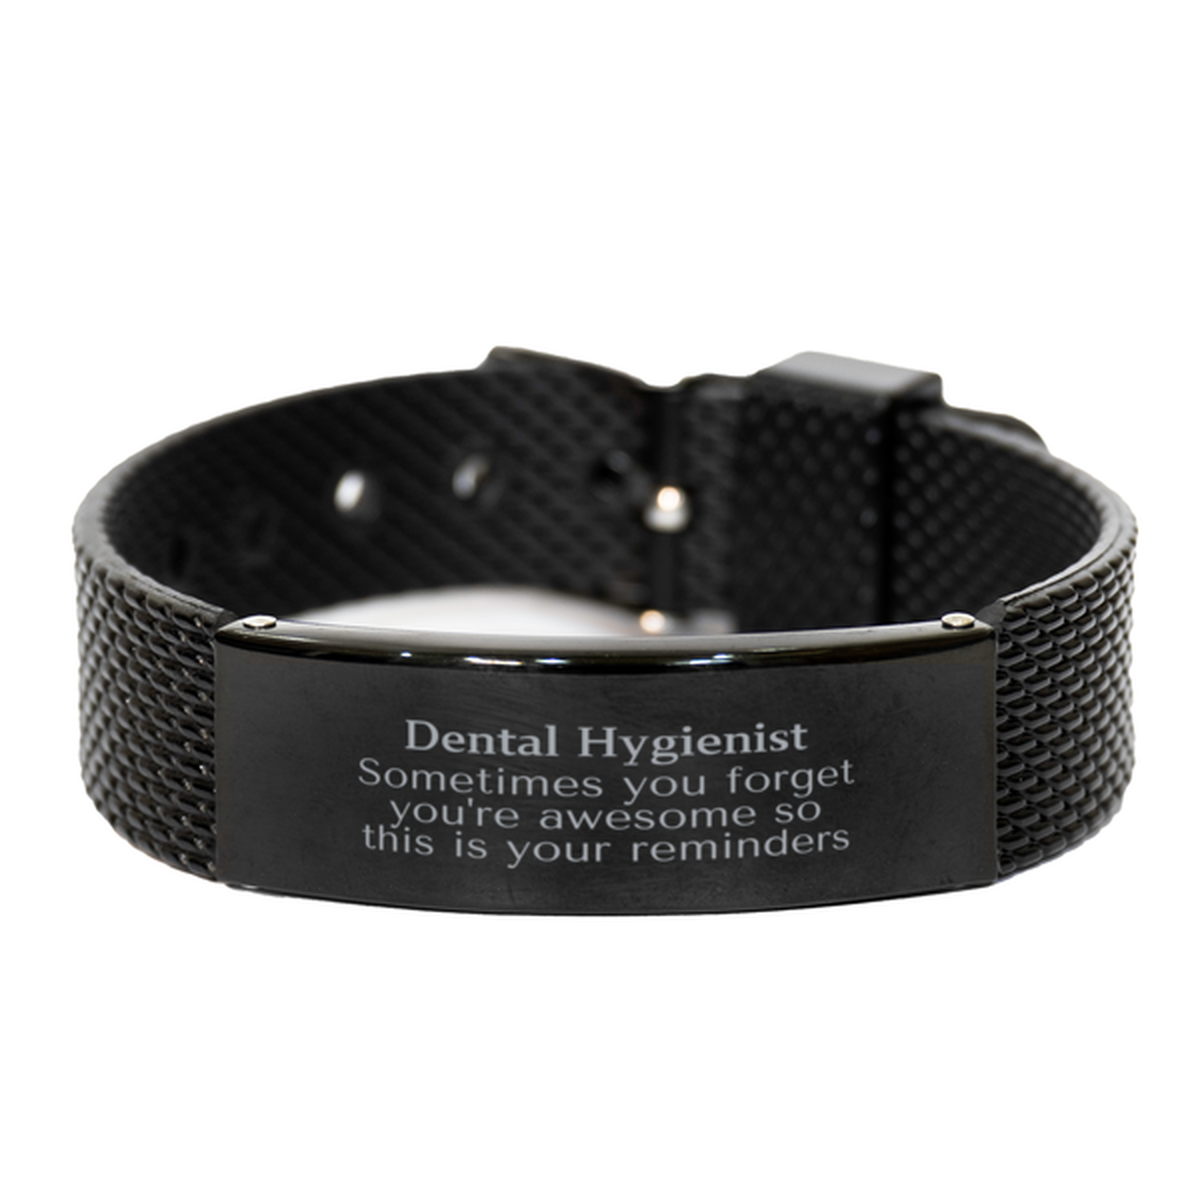 Sentimental Dental Hygienist Black Shark Mesh Bracelet, Dental Hygienist Sometimes you forget you're awesome so this is your reminders, Graduation Christmas Birthday Gifts for Dental Hygienist, Men, Women, Coworkers